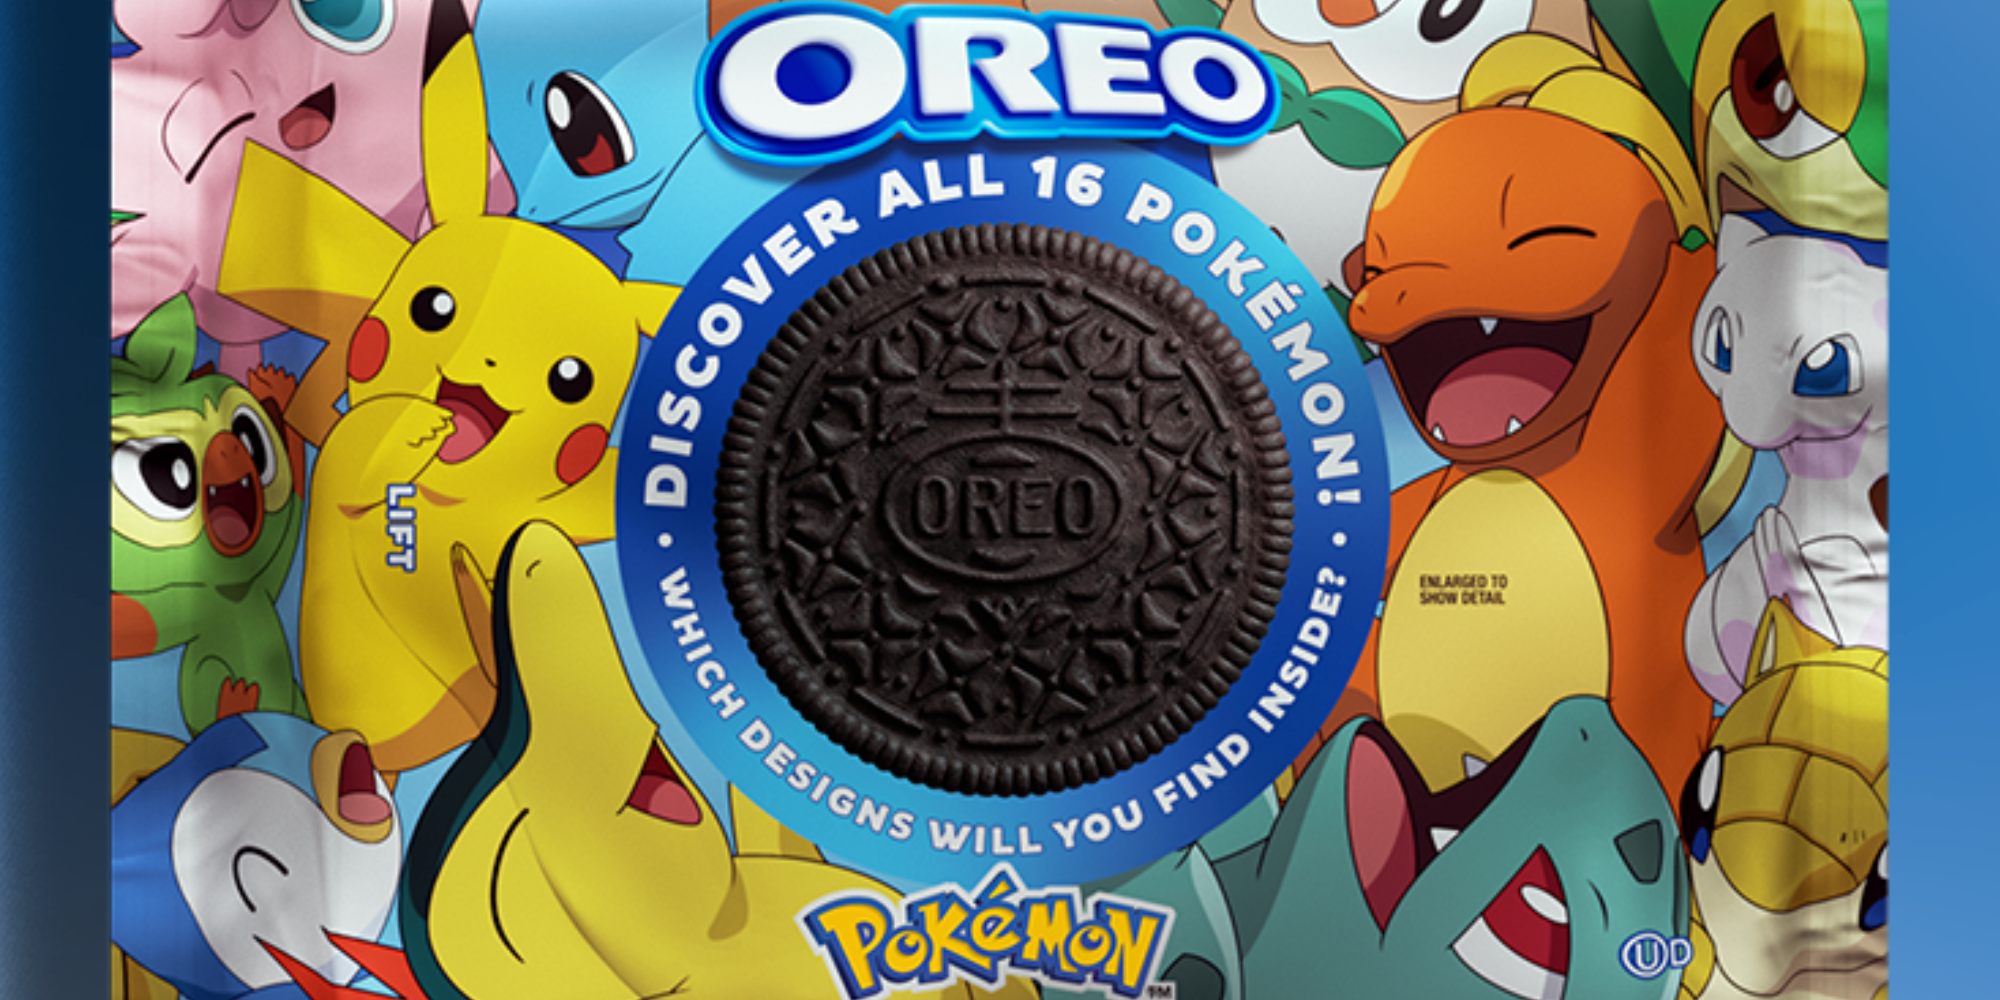 Pokémon x OREOs Limited-Edition Packaging